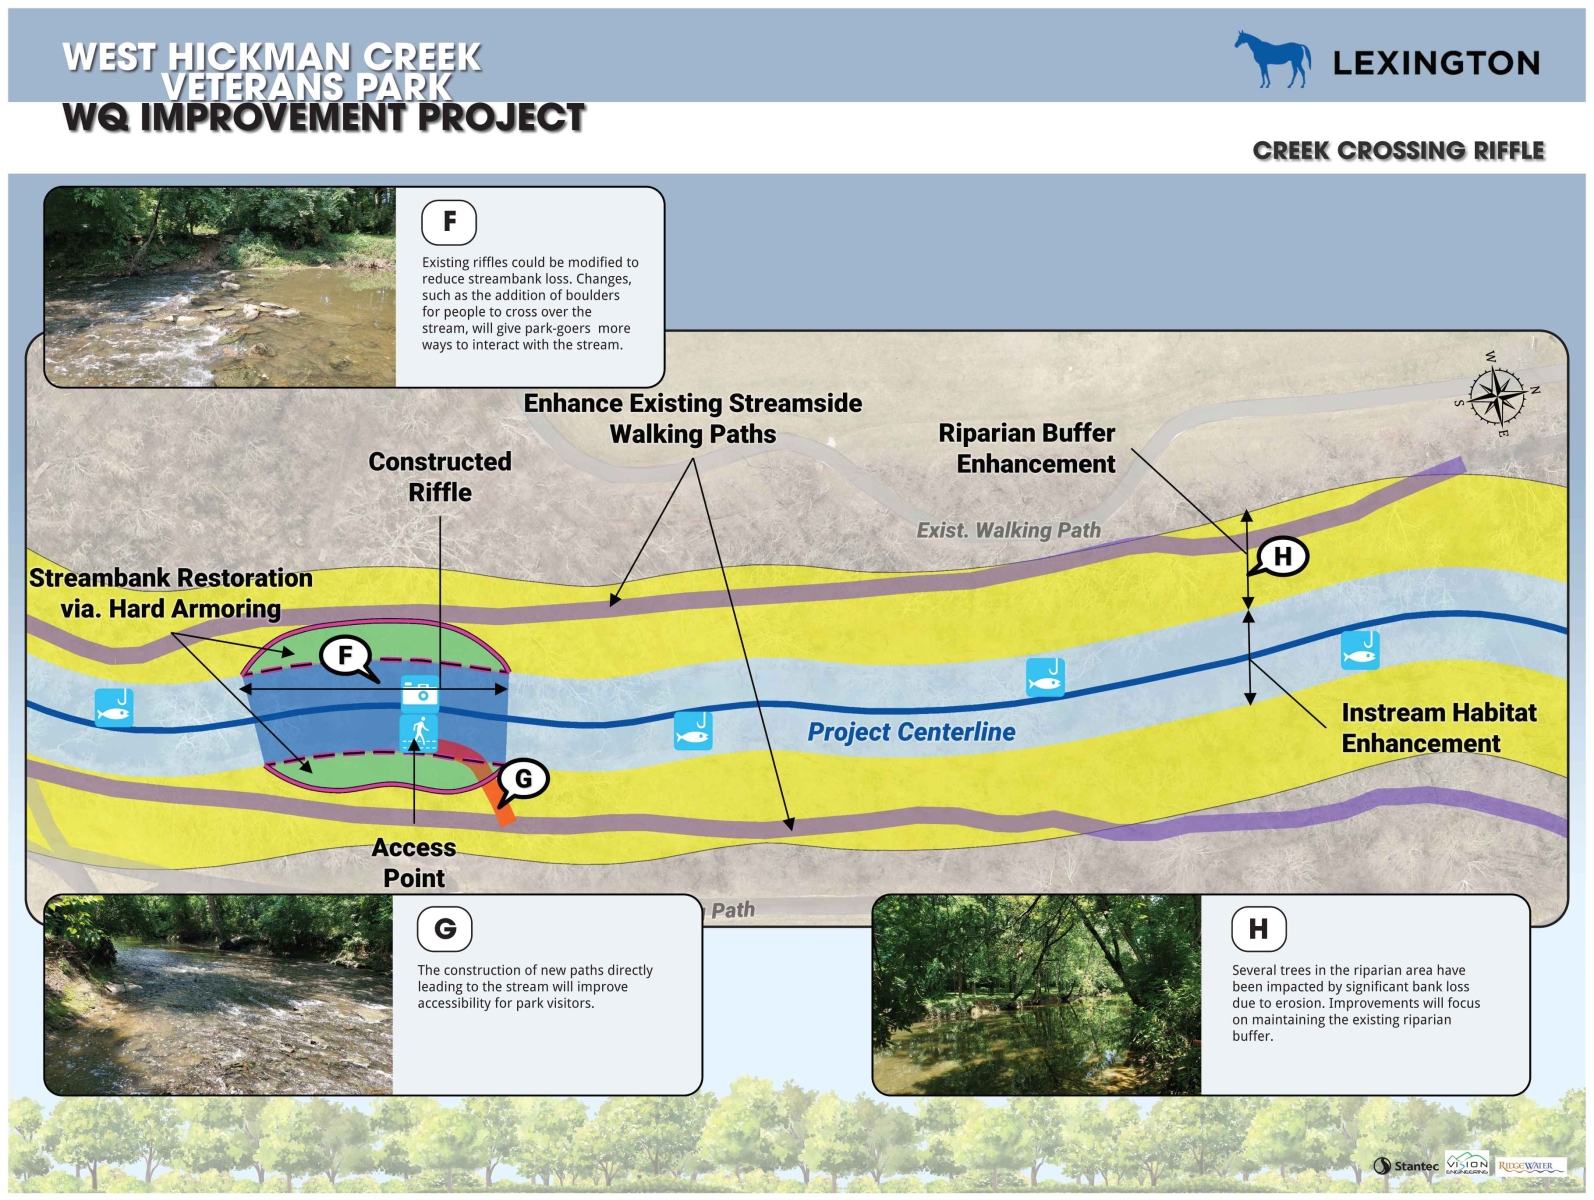 diagram of stream riffle locations, or areas where the water is shallow and moves fast. Improvements include walking paths, improved habitat, and more vegetated buffers along the stream